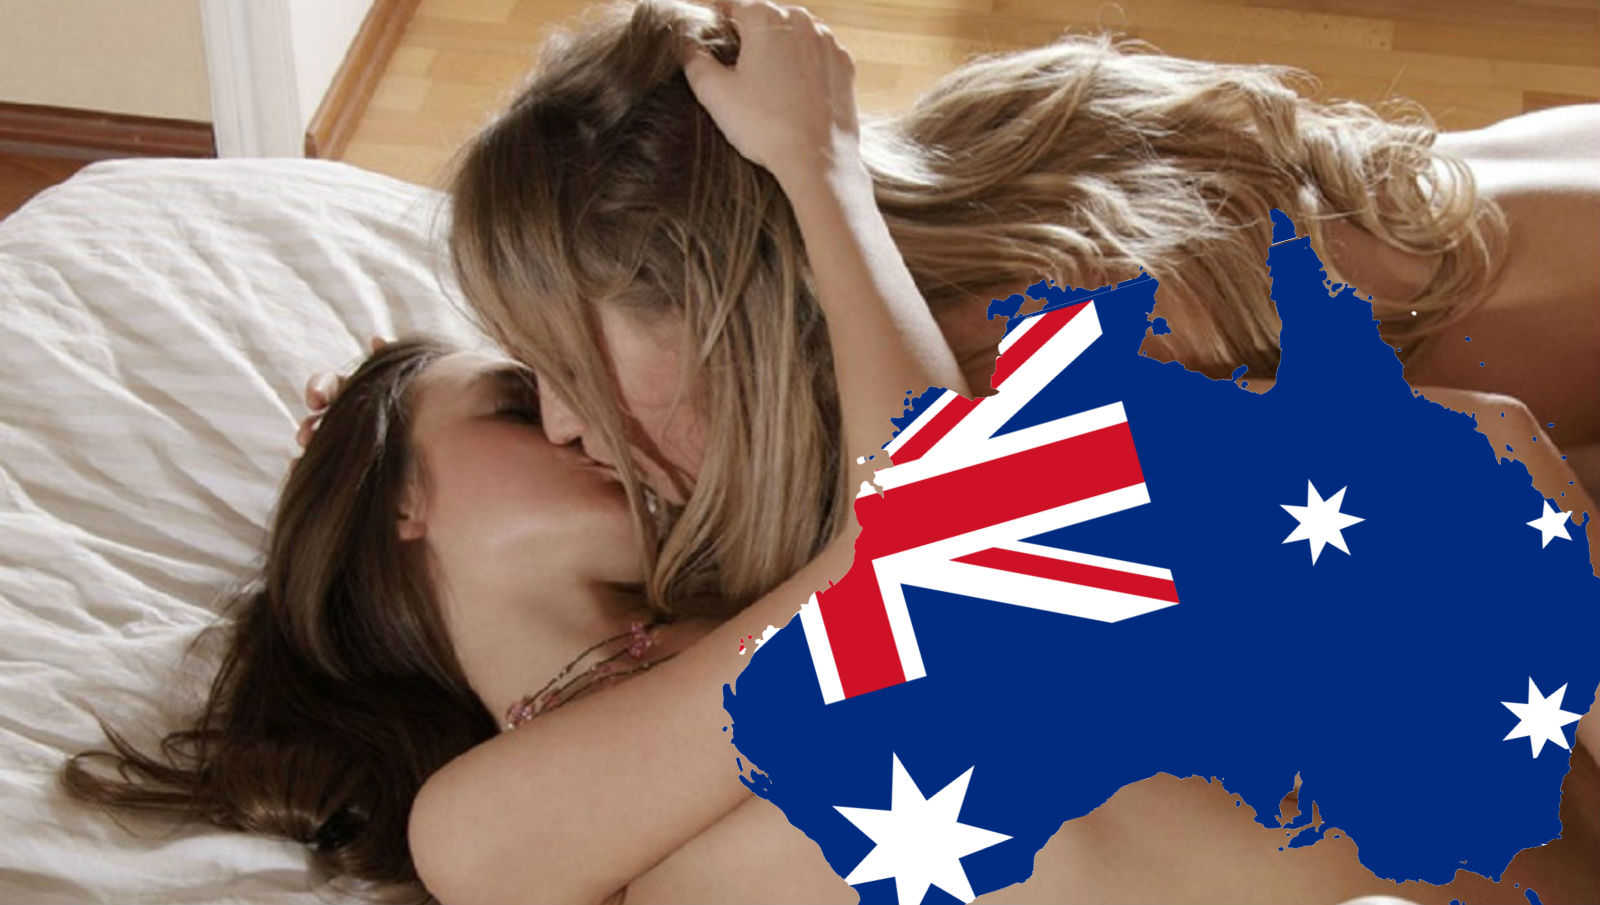 Australian Kissing Porn - Australia watched a ton of lesbian porn while blocking their right to marry  | PinkNews